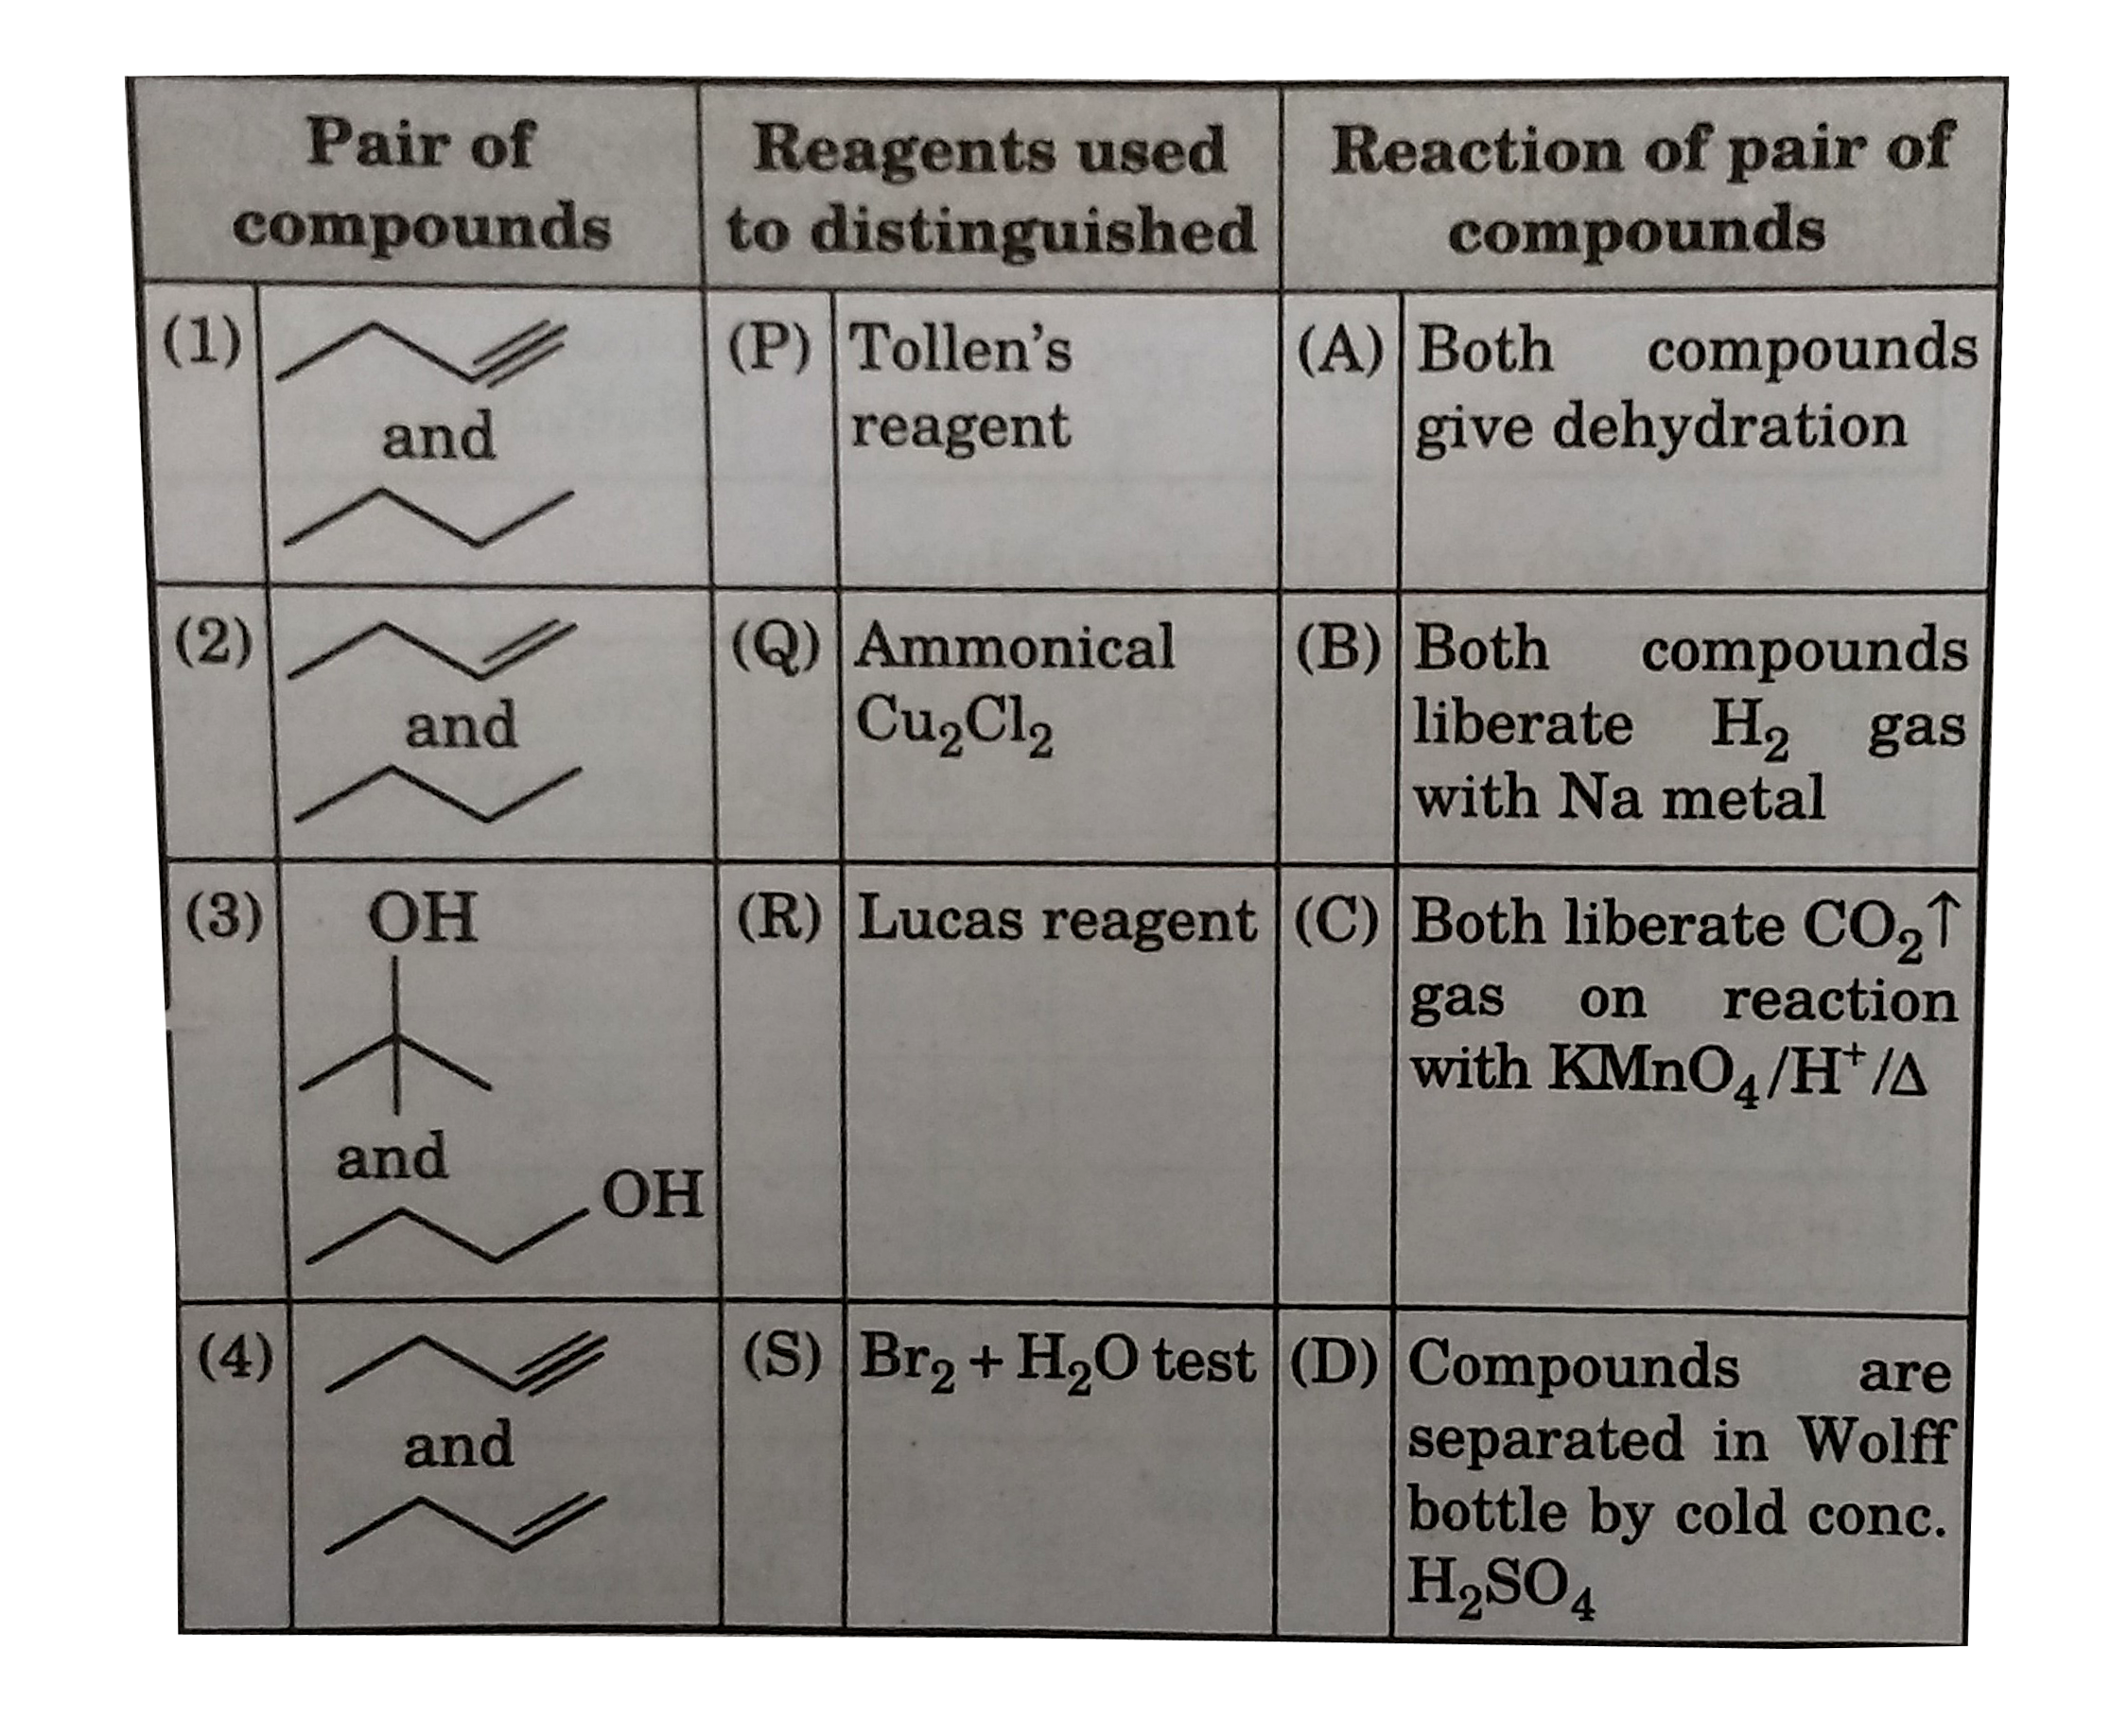 Identify correct set for 1nd pair of compounds ?